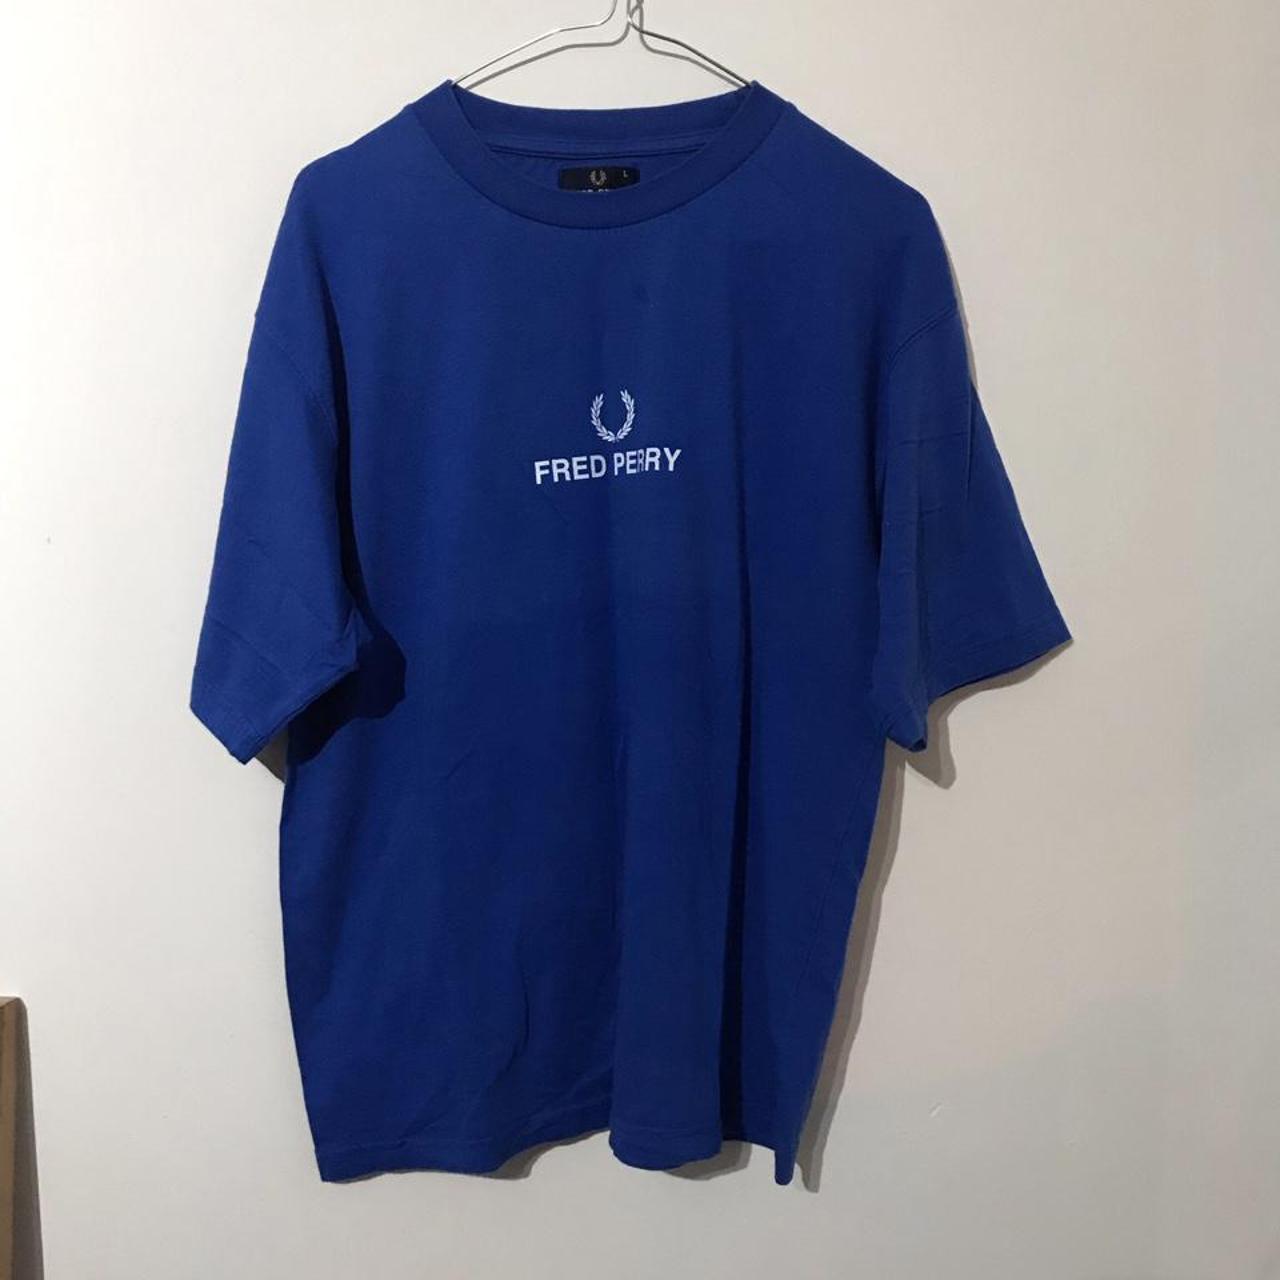 Product Image 1 - Men's vintage Fred Perry logo